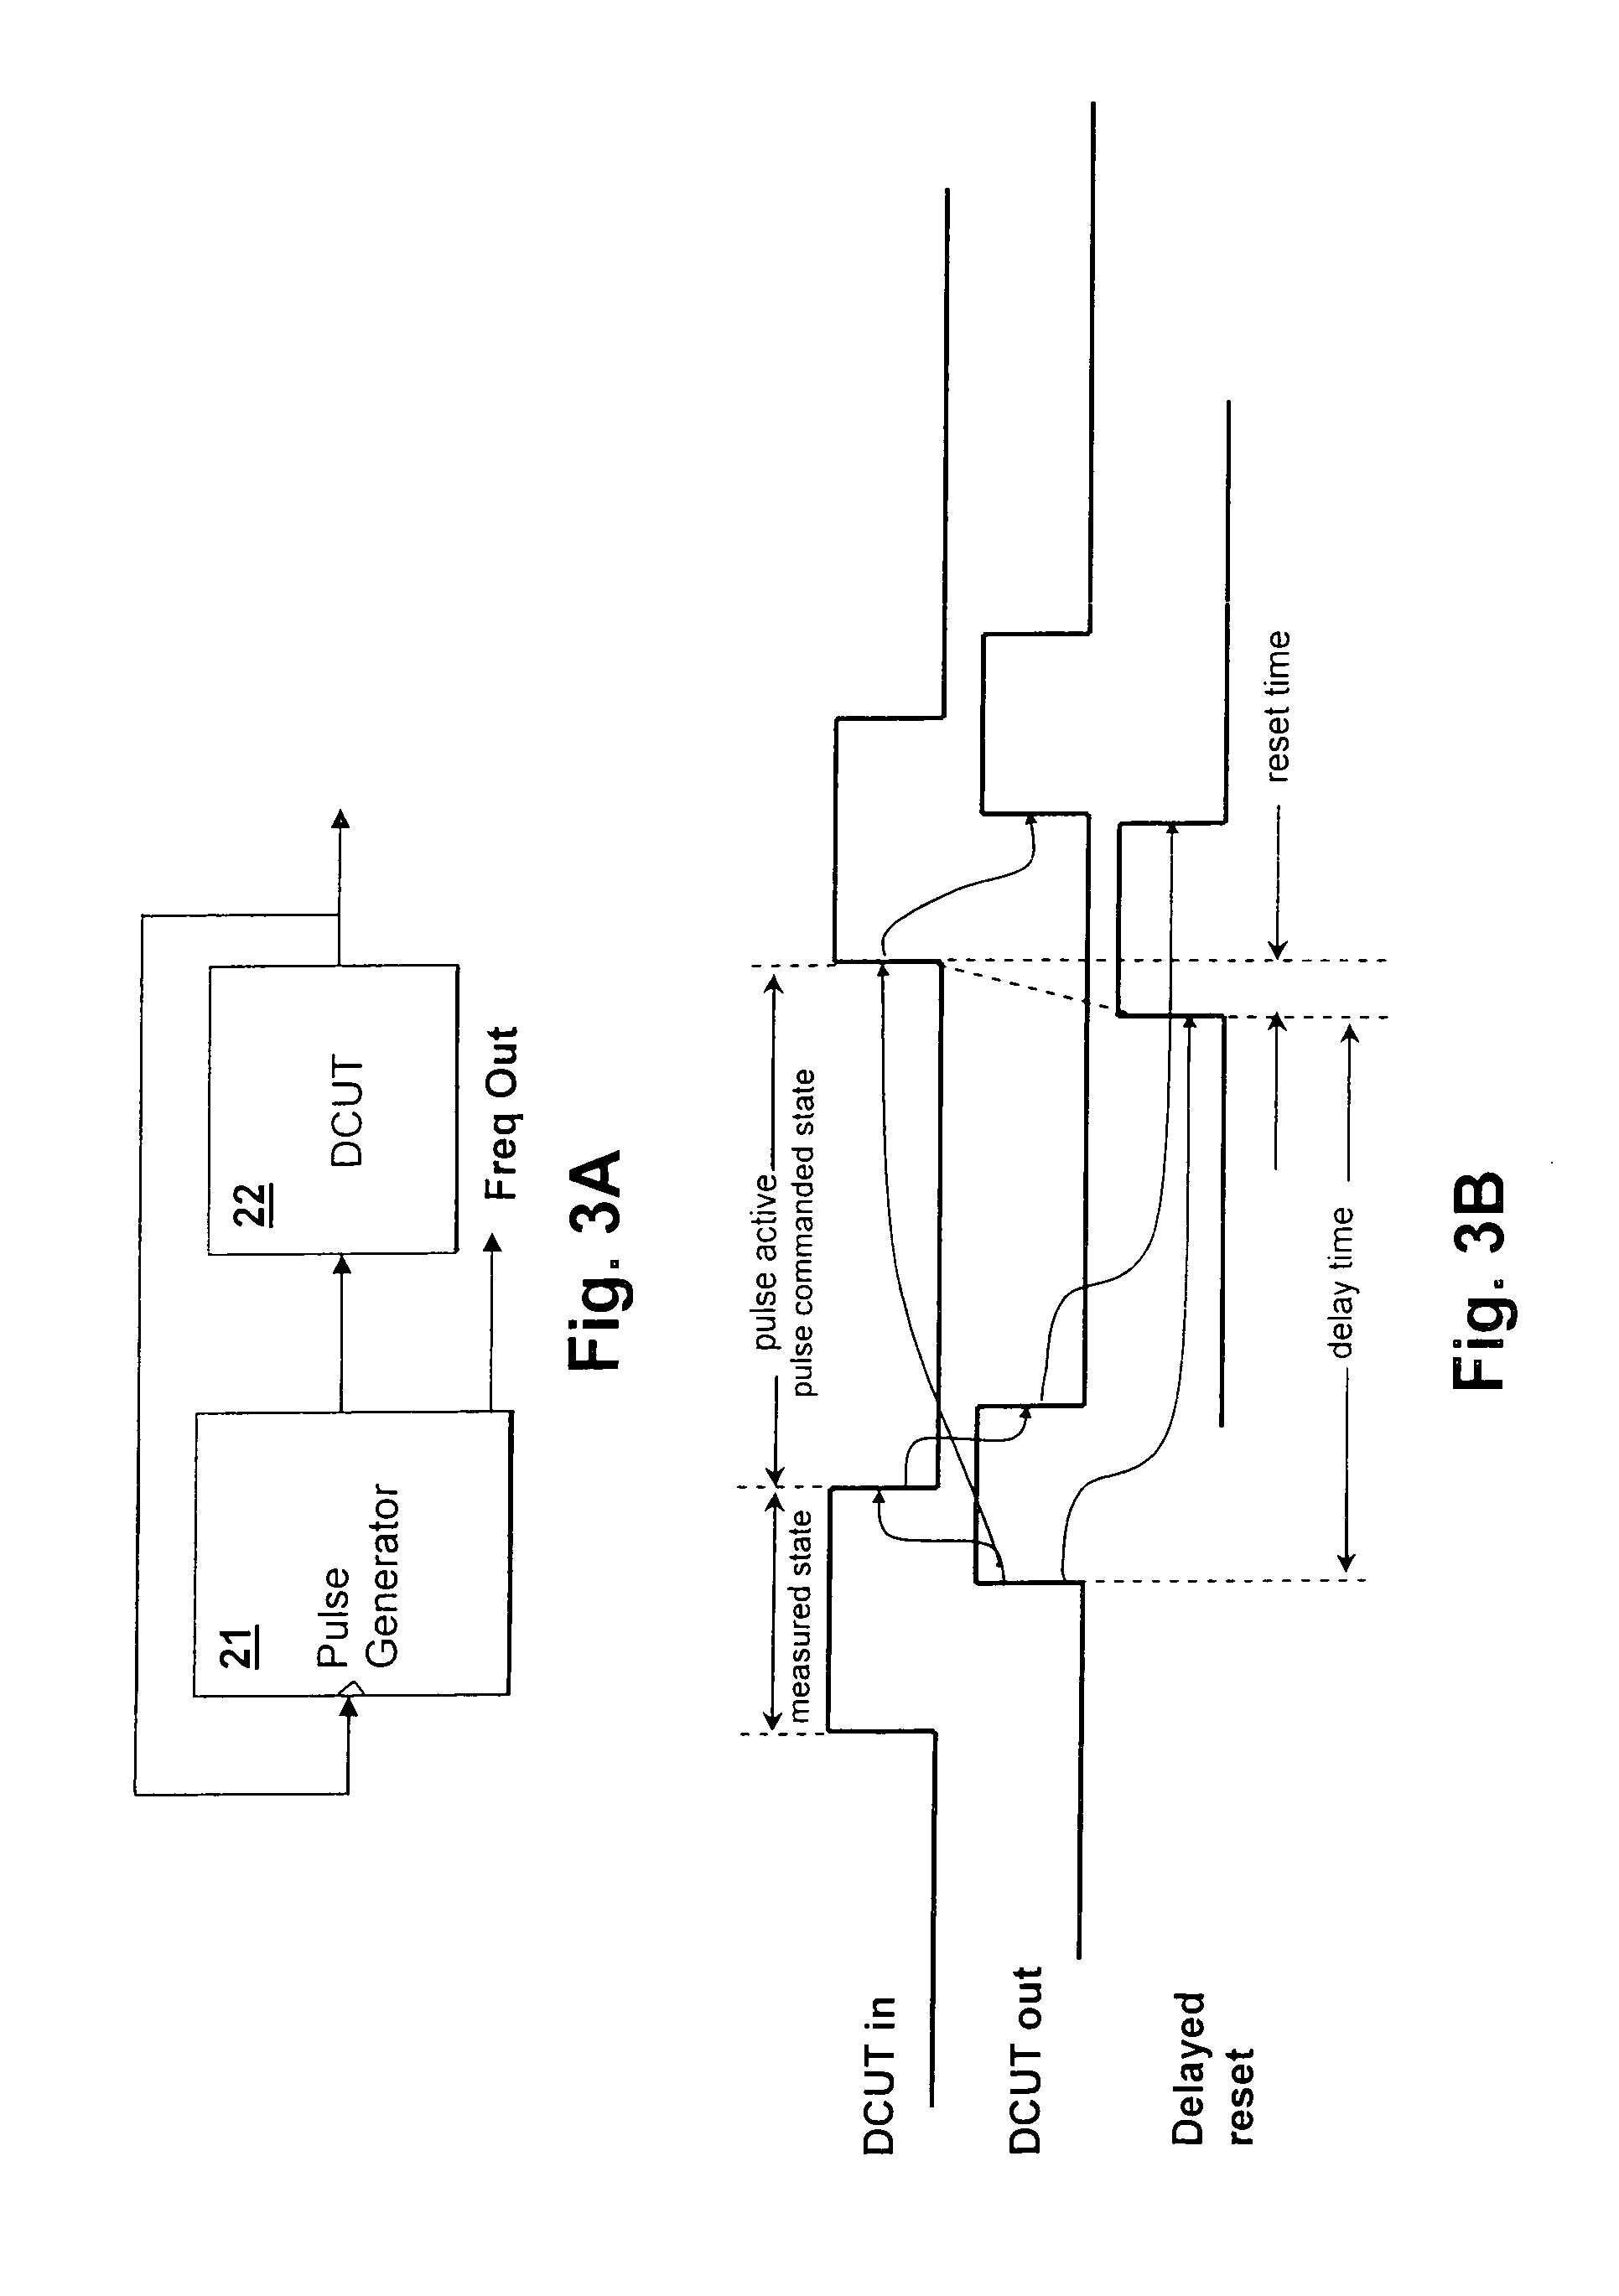 Method and ring oscillator circuit for measuring circuit delays over a wide operating range